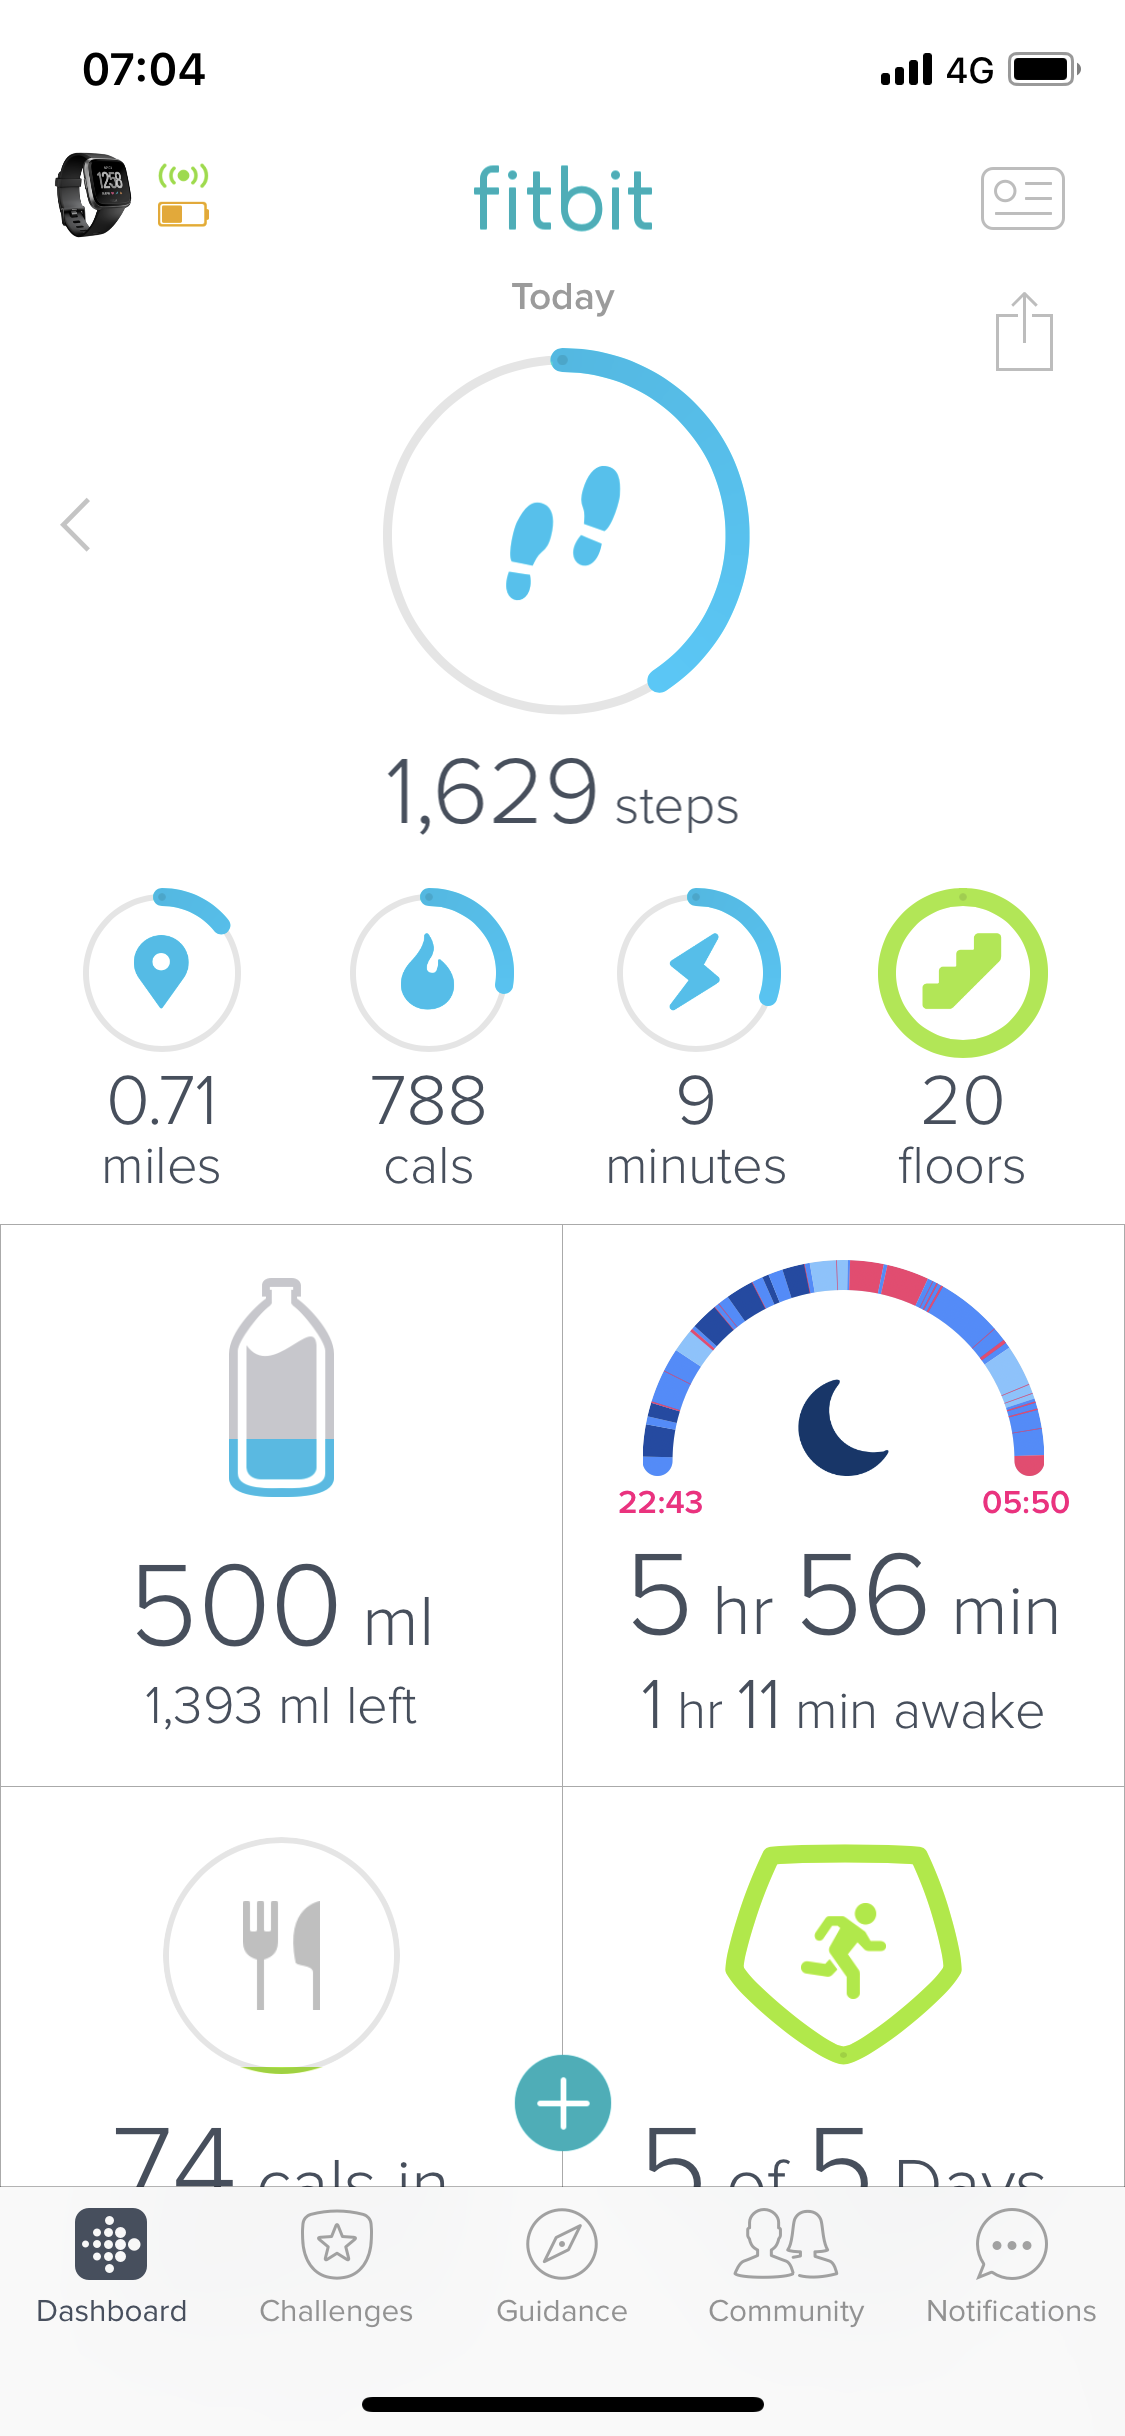 which fitbits count floors